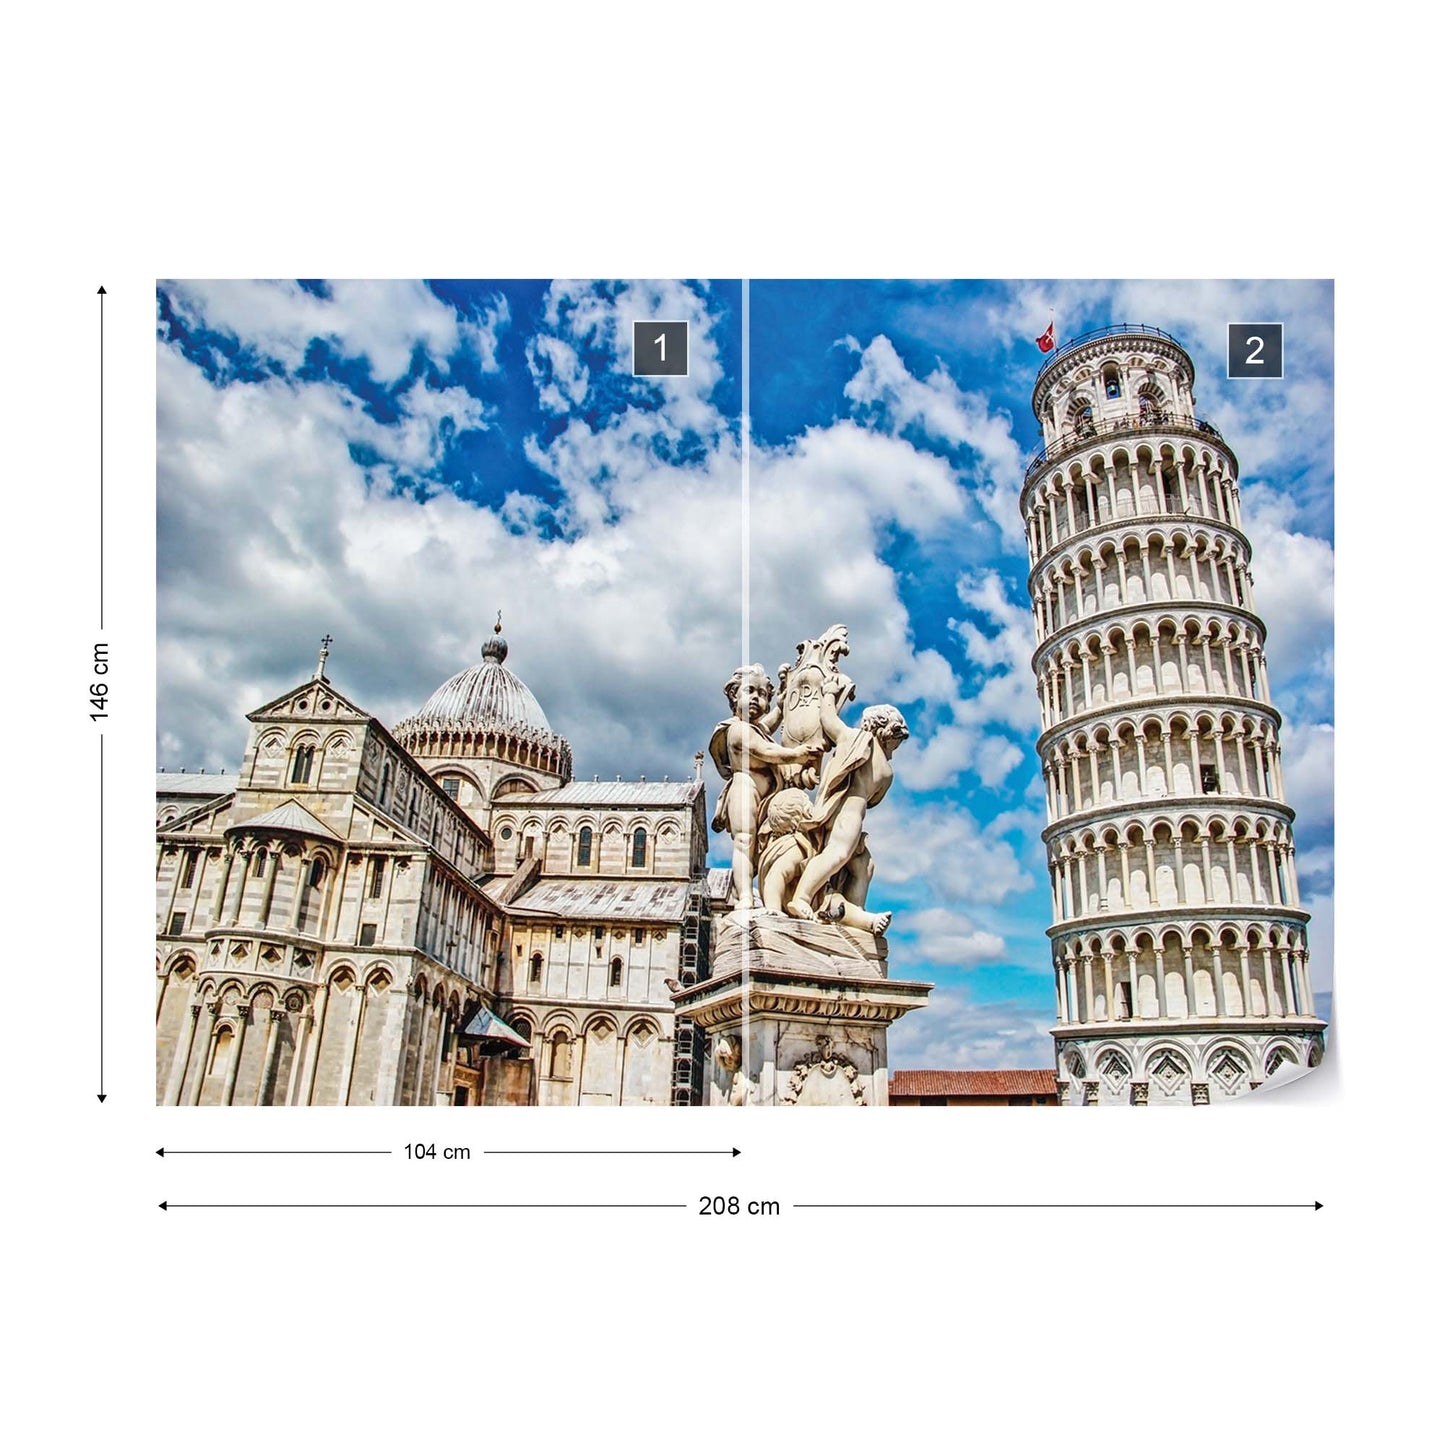 Leaning Tower Of Pisa Italy Photo Wallpaper Wall Mural - USTAD HOME